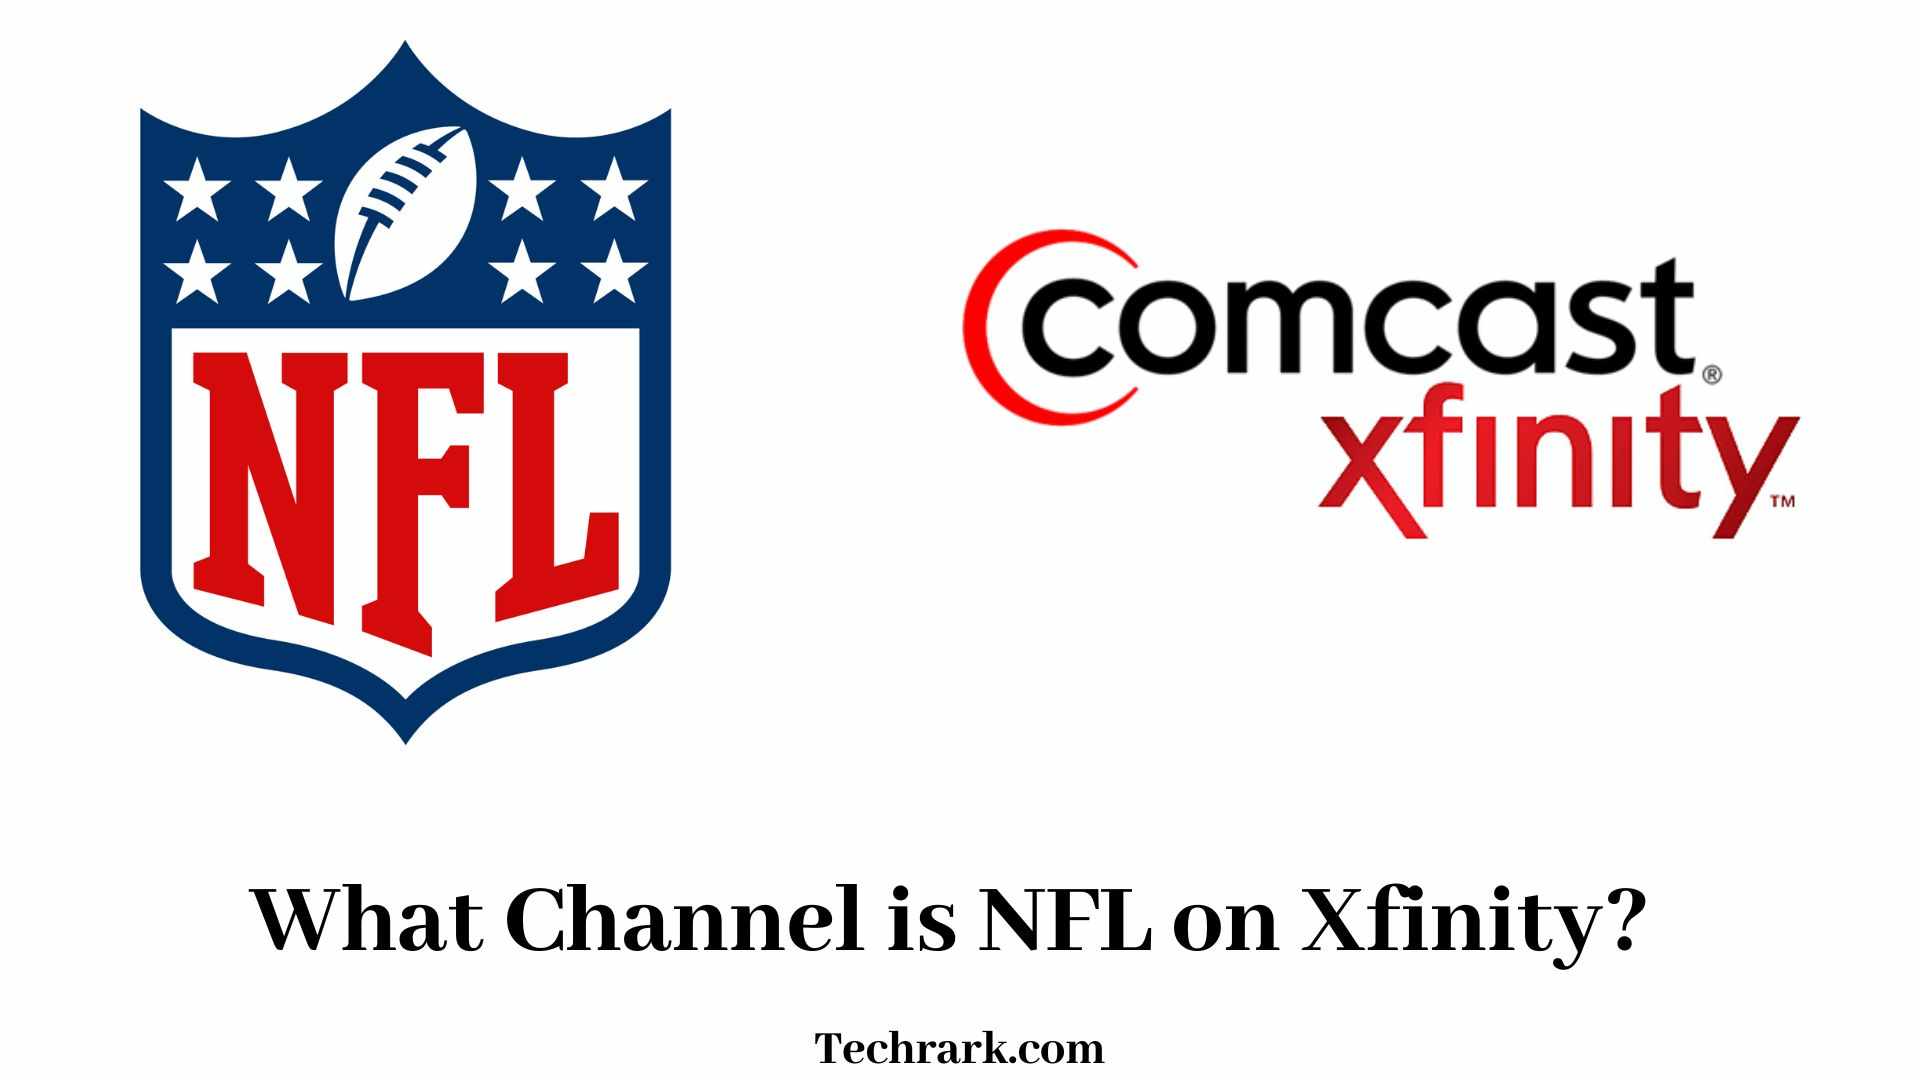 What Channel is NFL on Xfinity